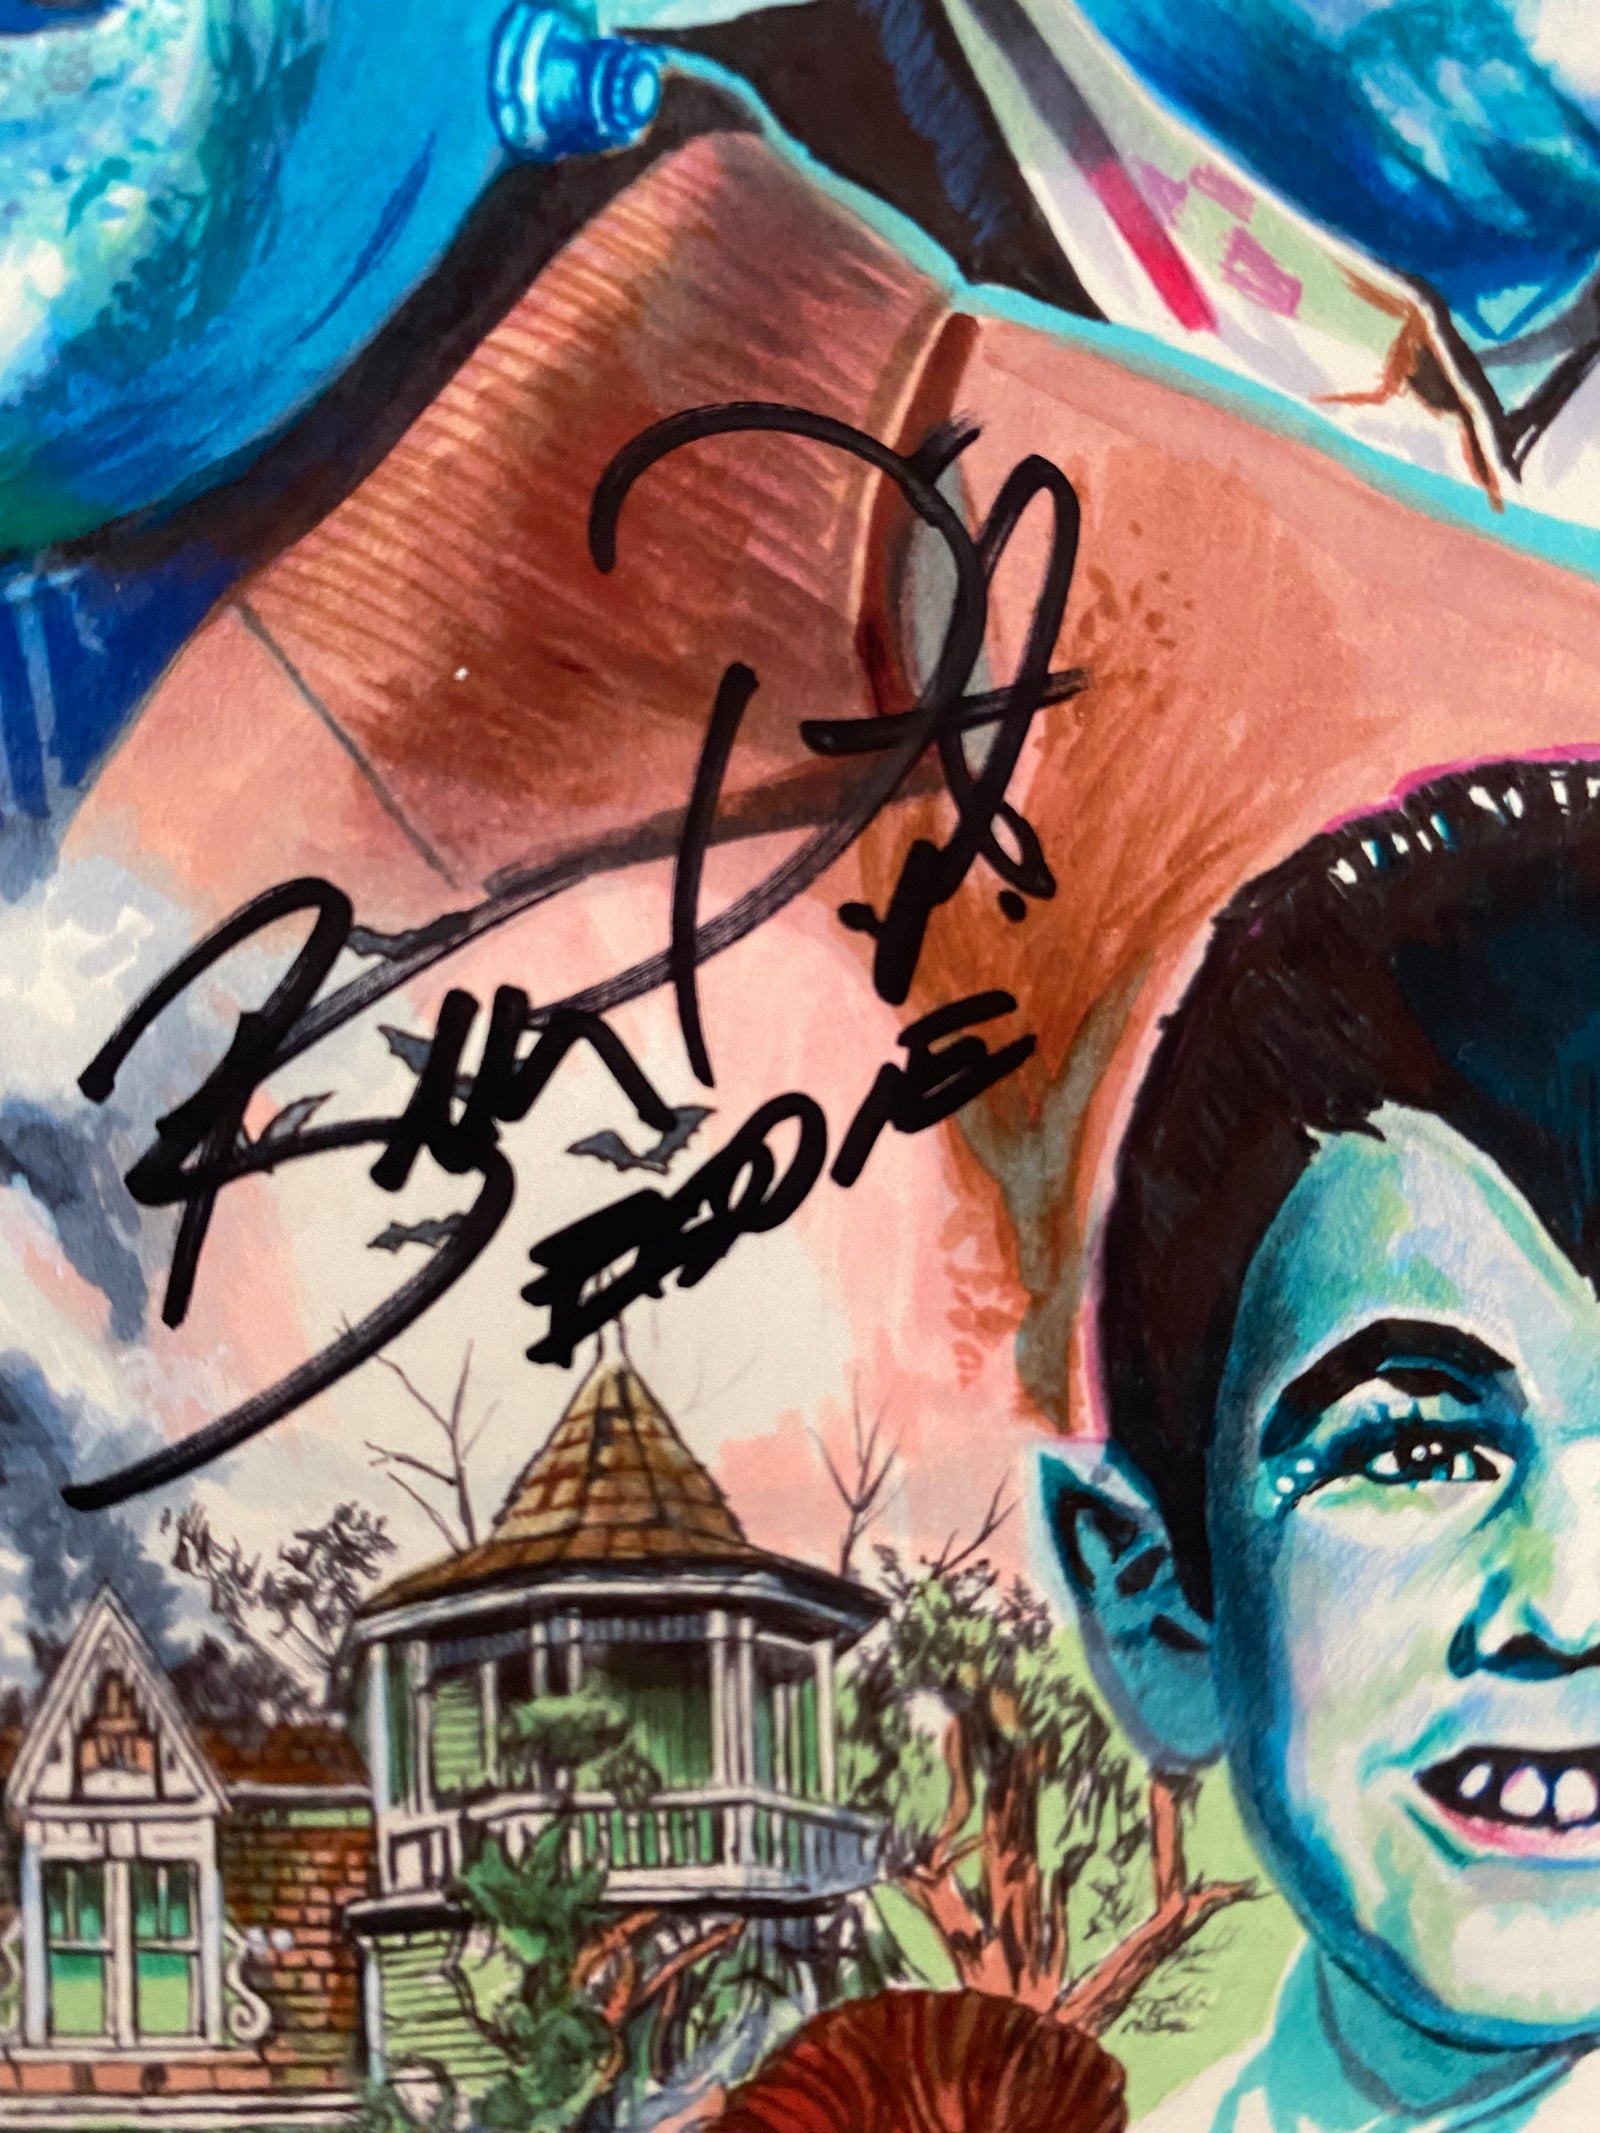 Munsters signed by Butch Patrick